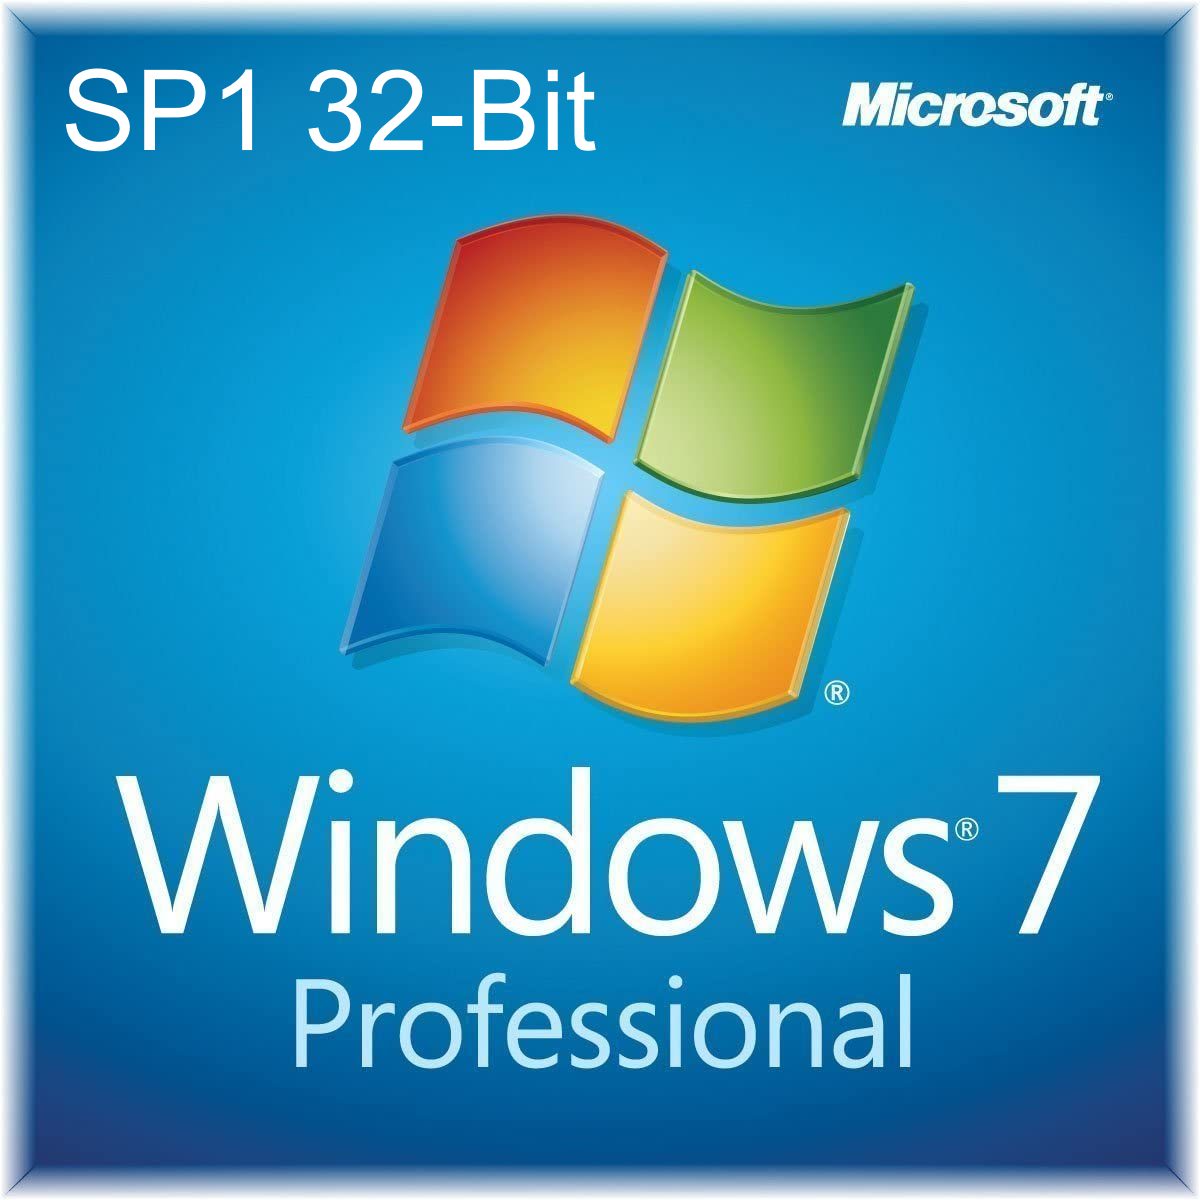 Download Windows 7 Professional SP1 ISO File